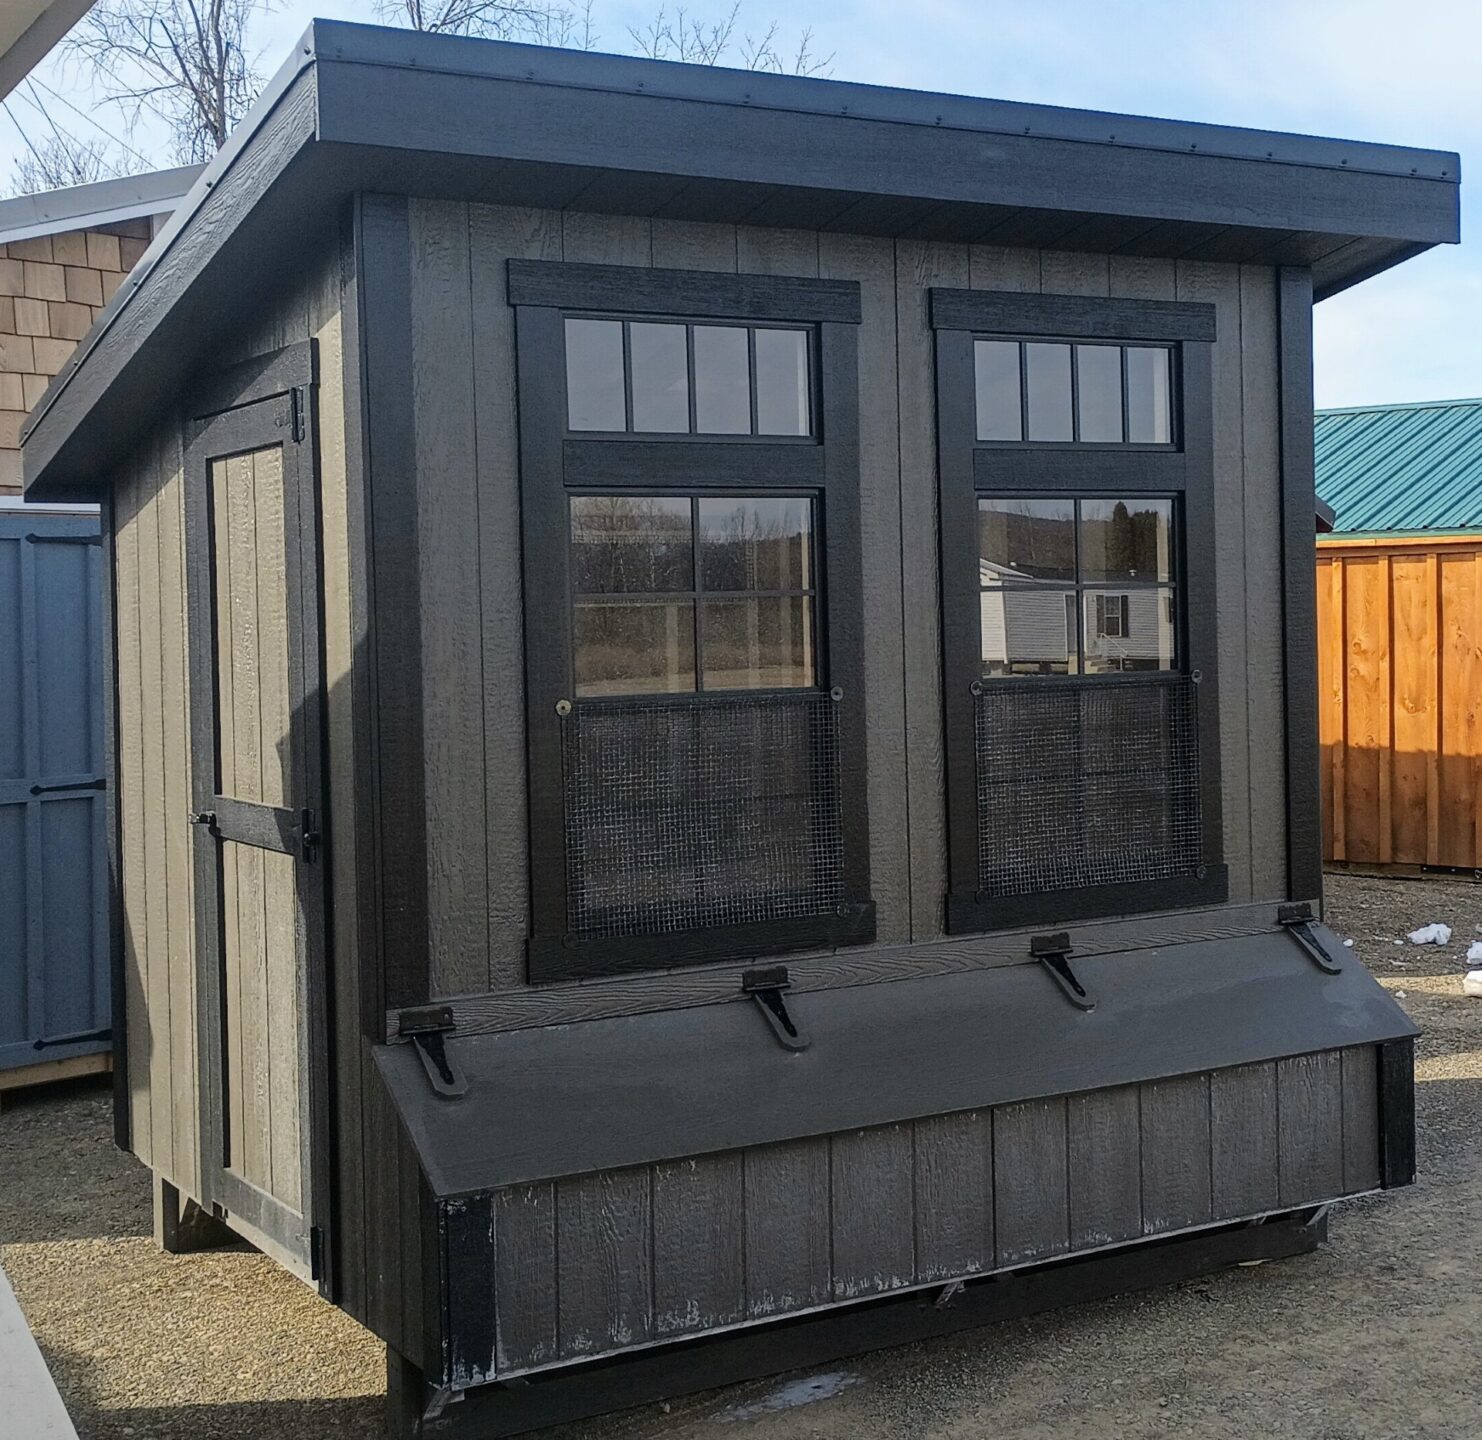 One slant chicken coop with two large windows and nesting boxes on front with a door on the side